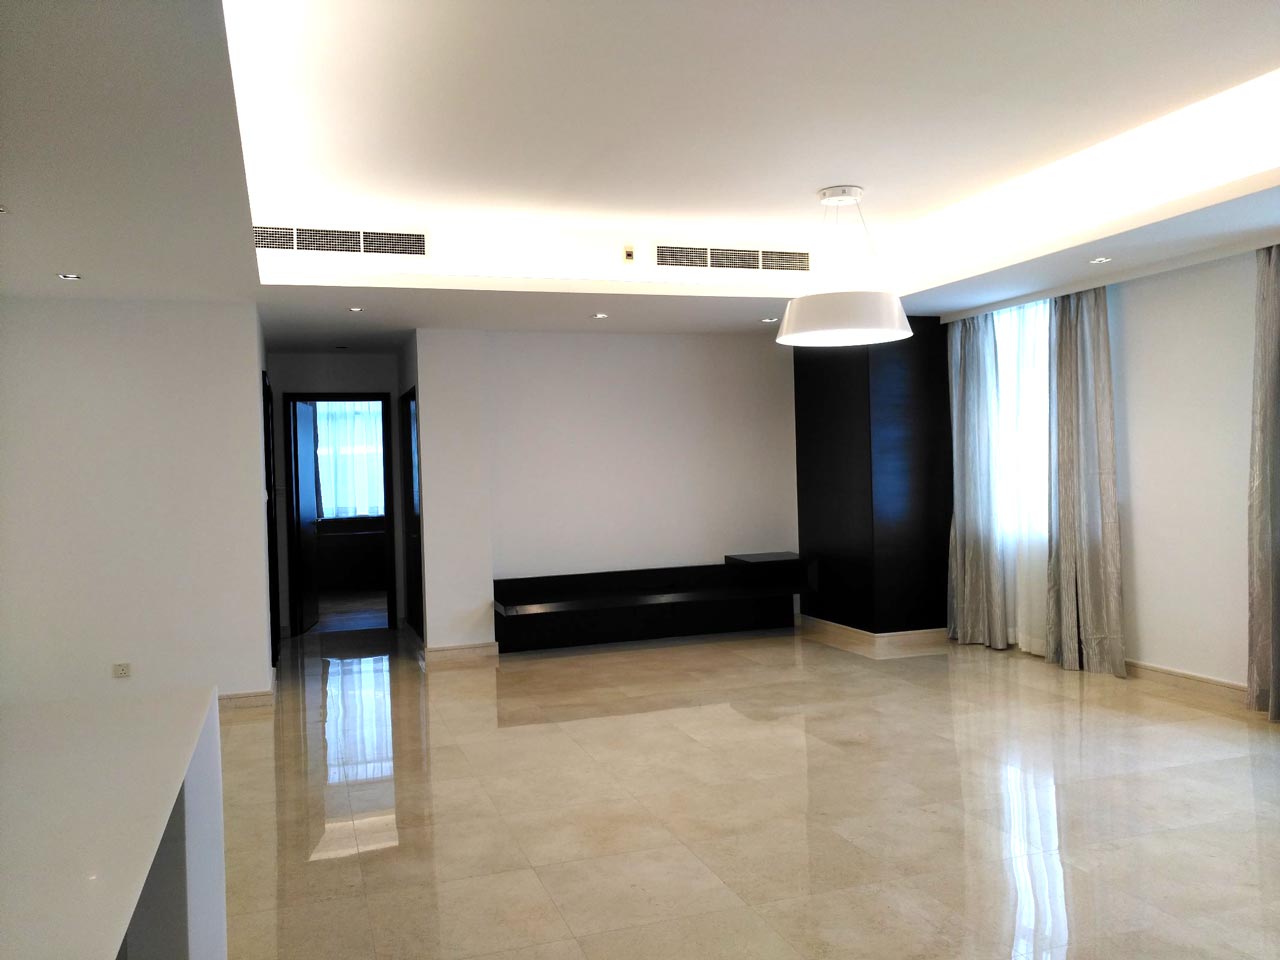 Orchard Scotts Condo For Rent - Living Room